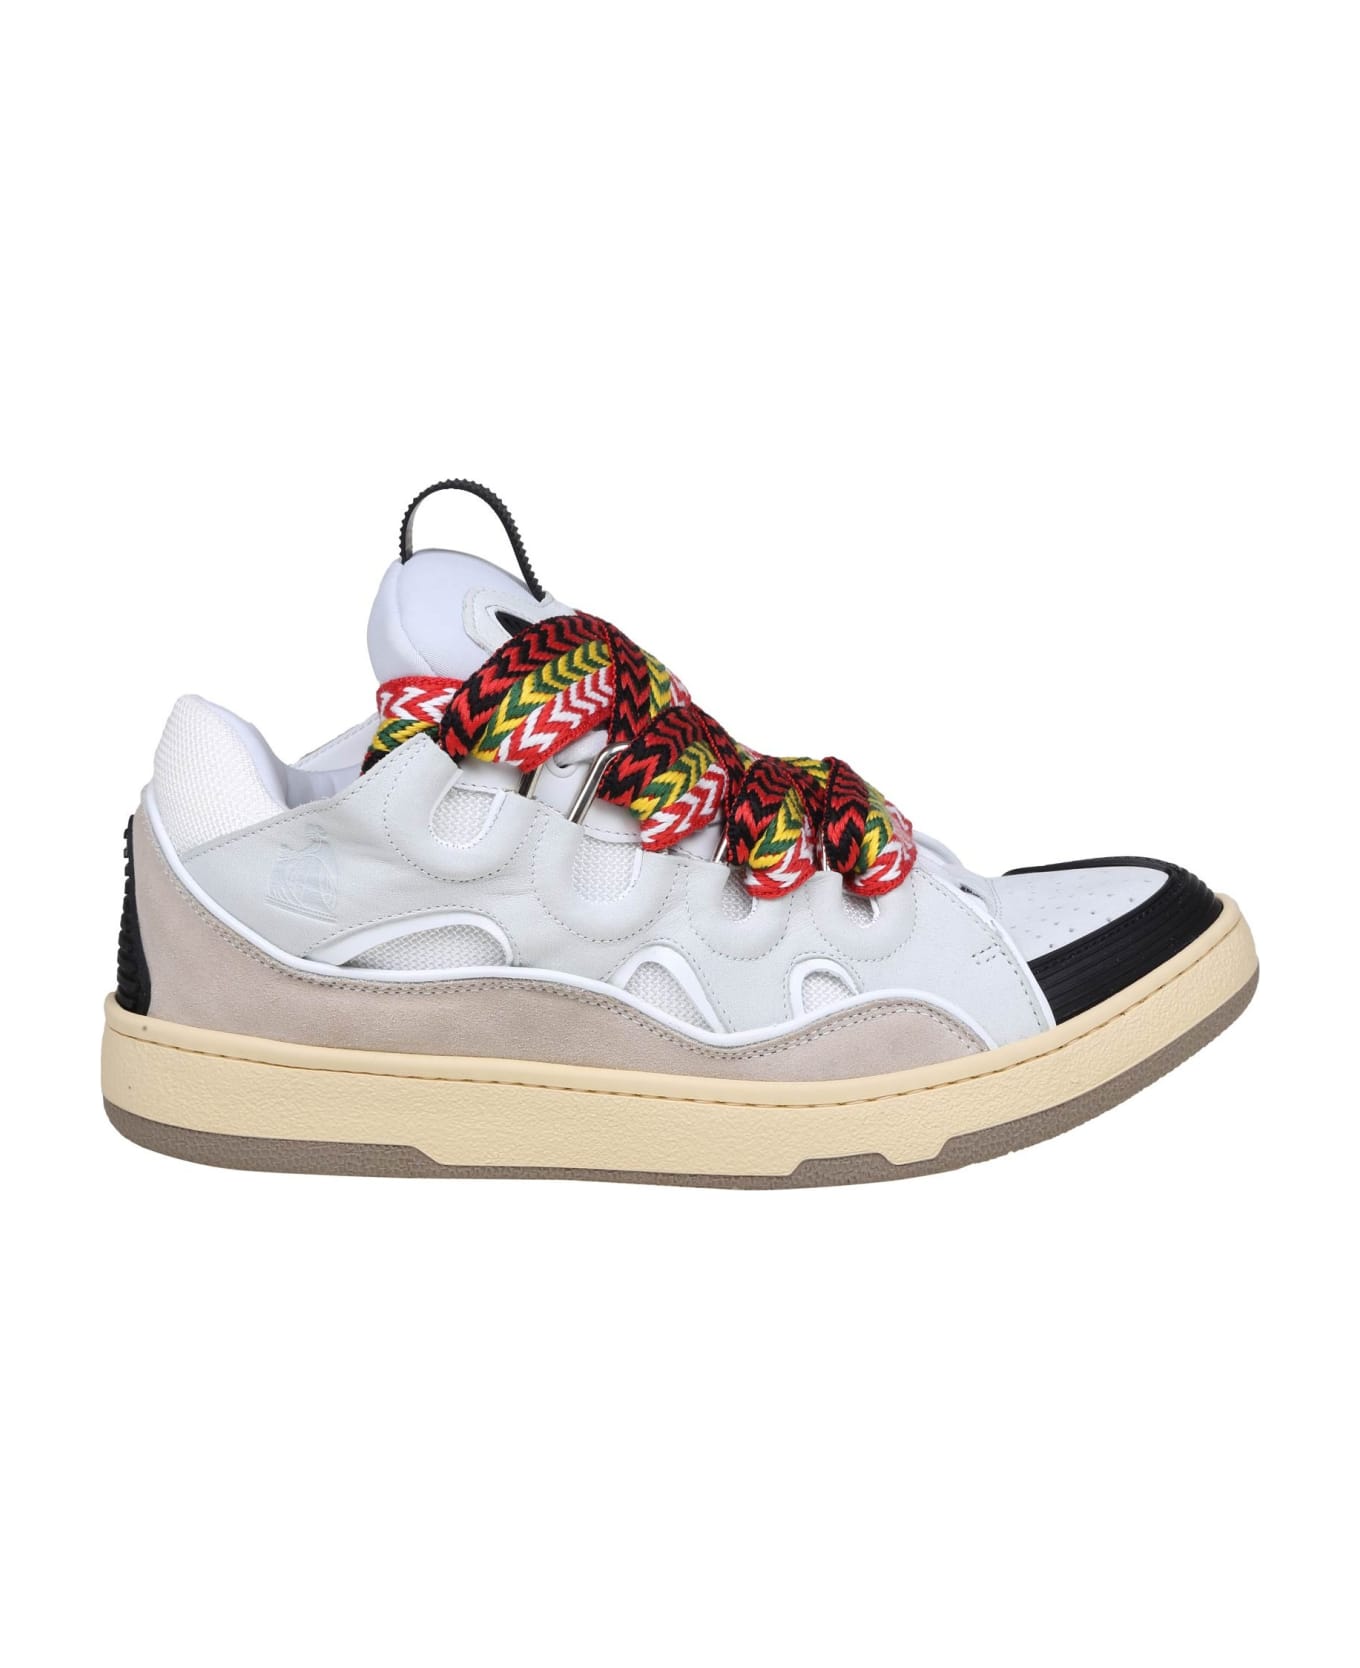 Lanvin Curb Sneakers In Leather And Suede With Multicolor Laces - White